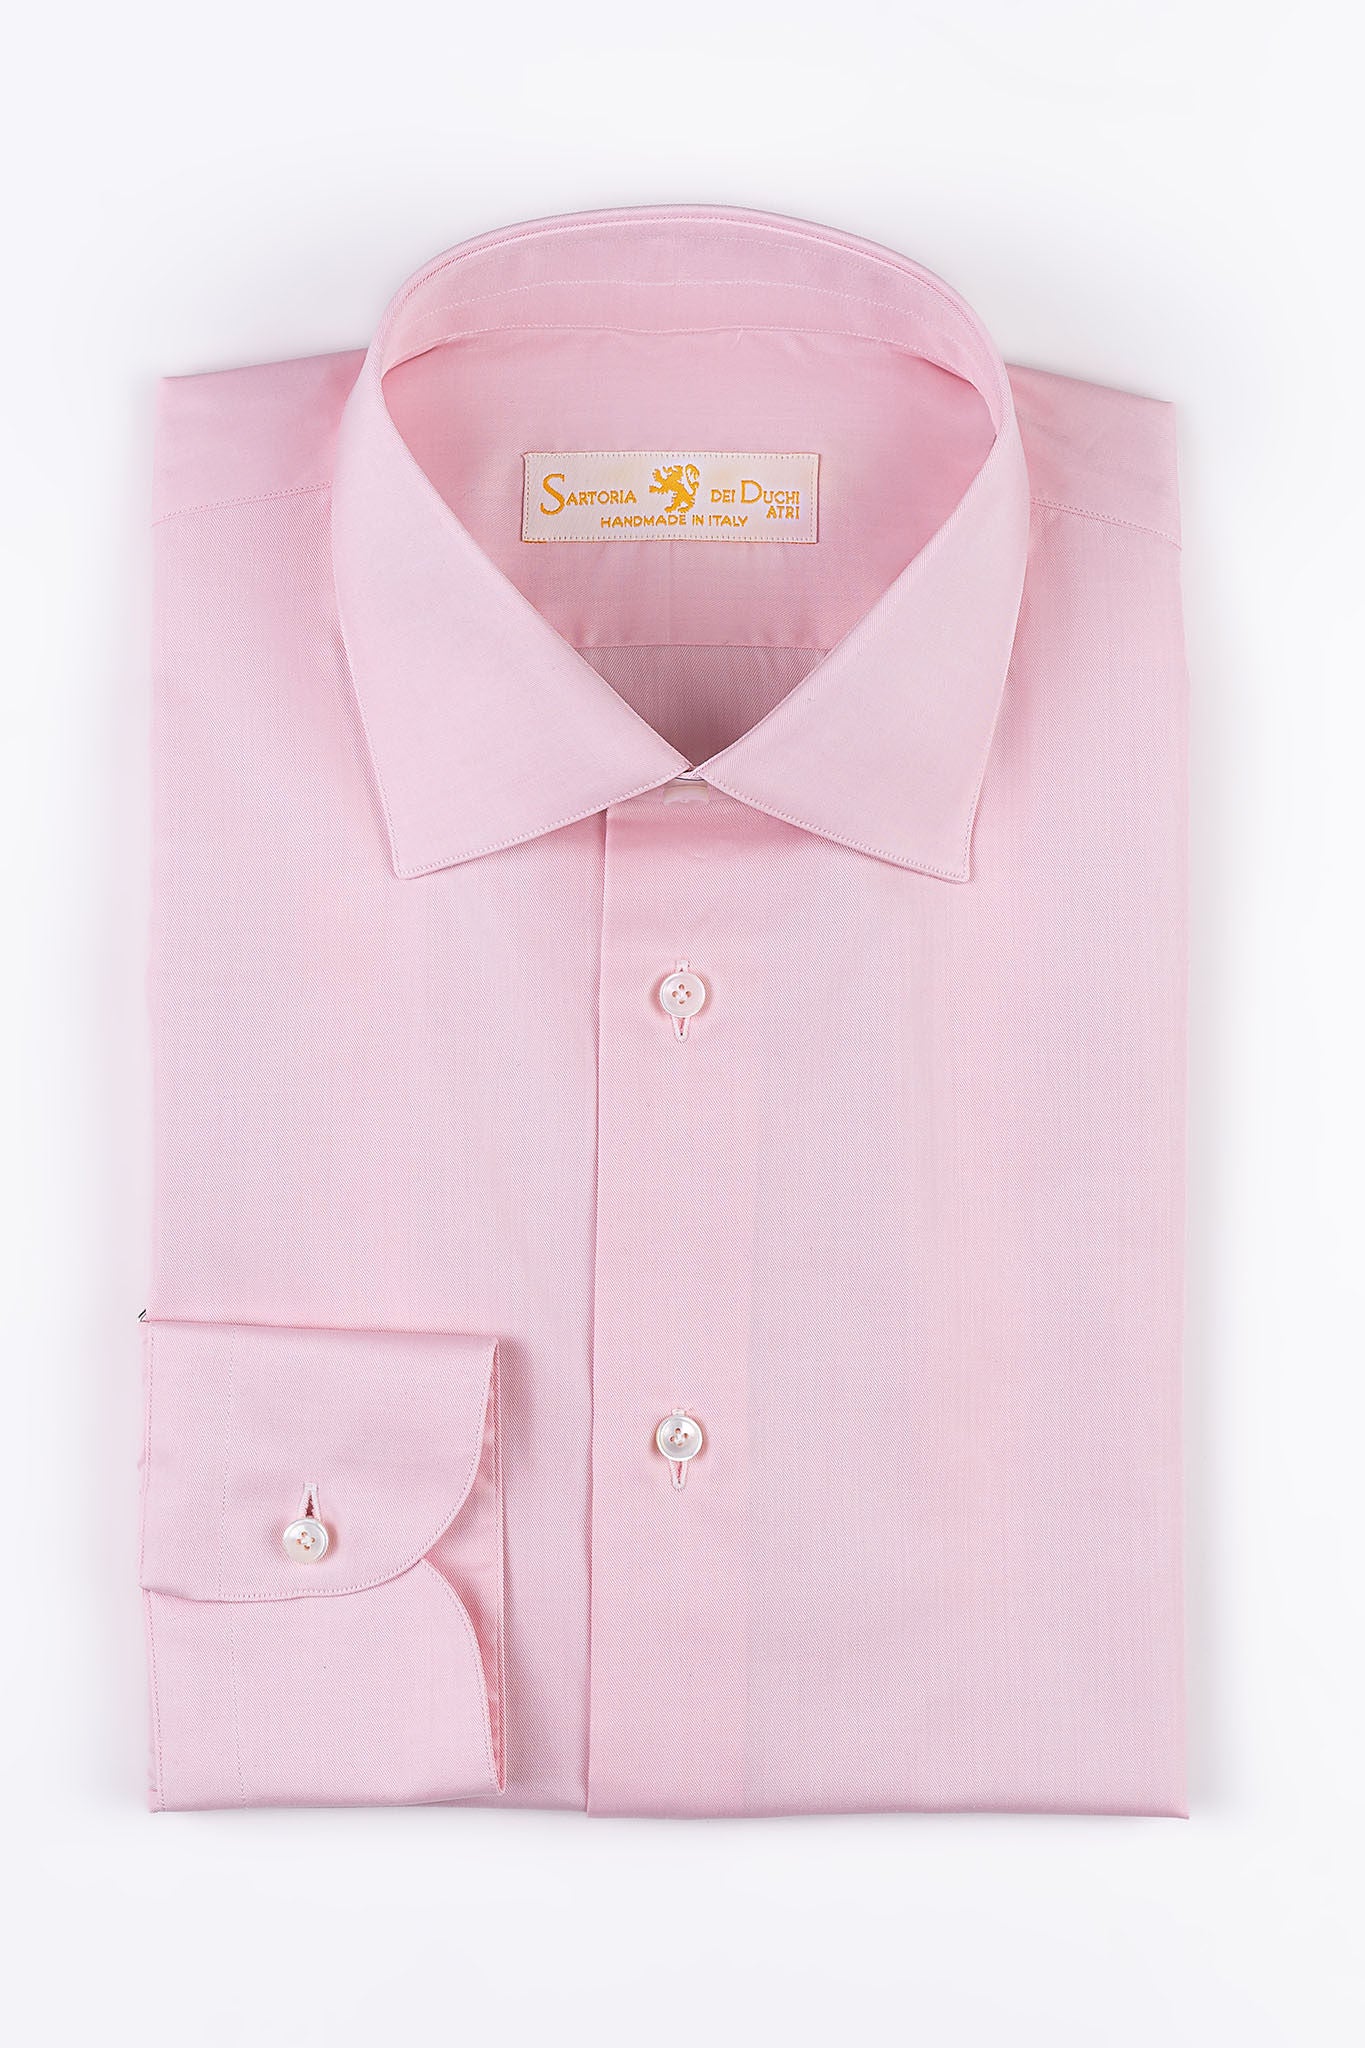 “HAMPTON SHIRT” is realized with a 140/2 cotton  twill by Thomas Mason &quot;Hampton&quot;, in pink color.  This long sleeve shirt is made with a semi French  collar and a rounded wrist. The stitching is 5 mm  and the buttons,applied by hand,are in mother of  pearl Australia.The fit is regular-Sartoria Dei Duchi-Atri